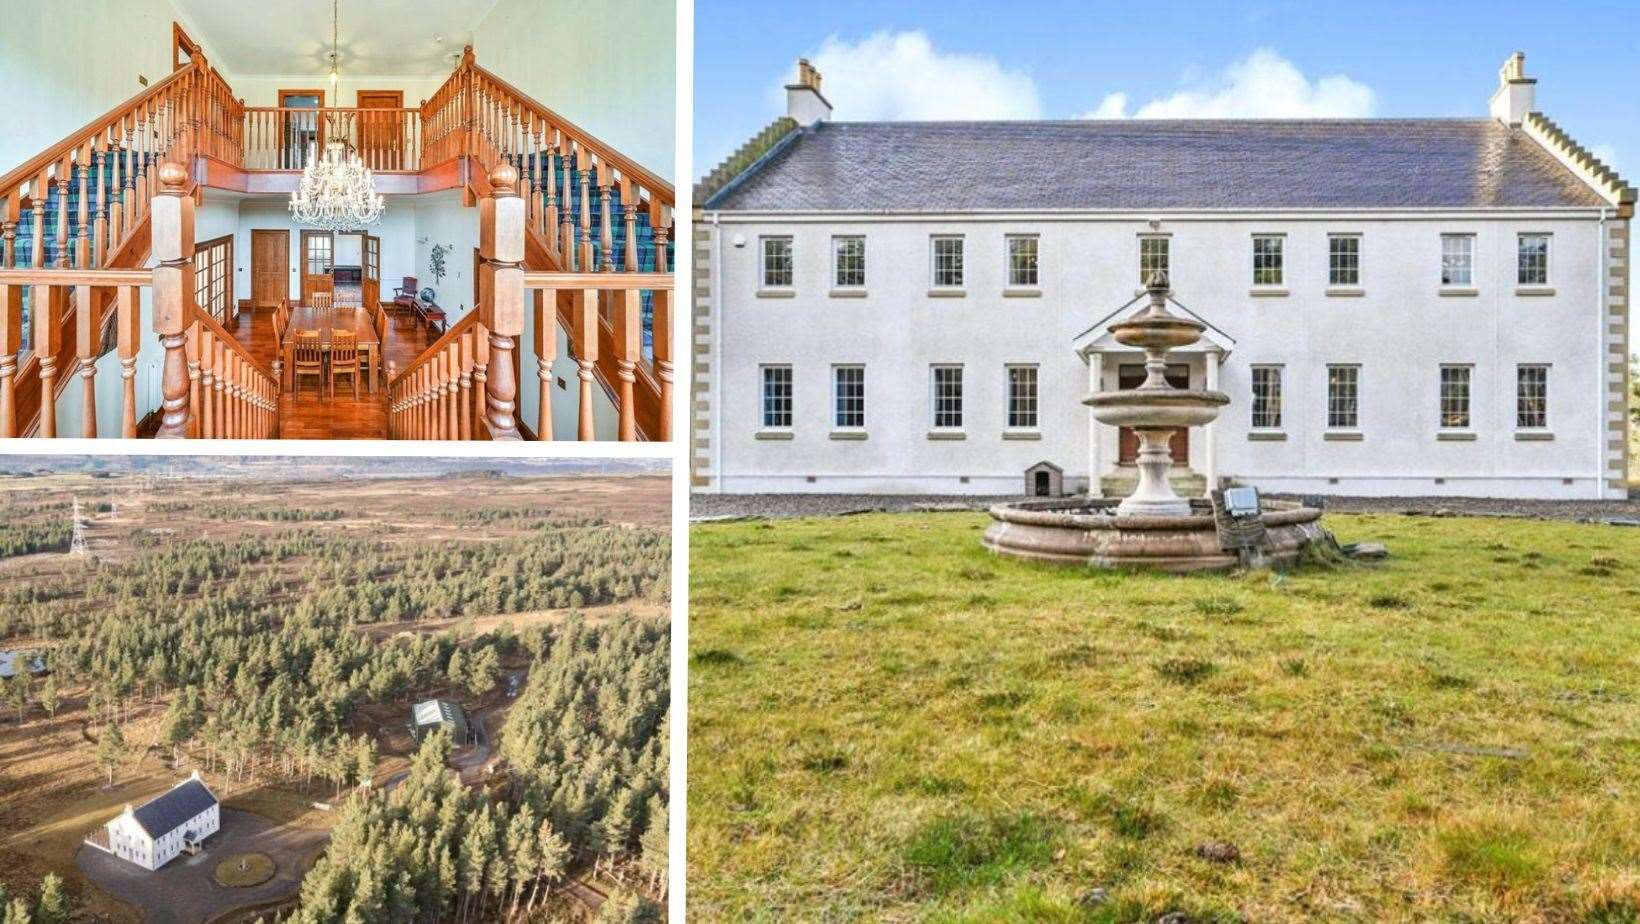 Inverness-shire mansion, that features 128 acres and a beautiful staircase. Pictures: YOUR MOVE, Inverness.